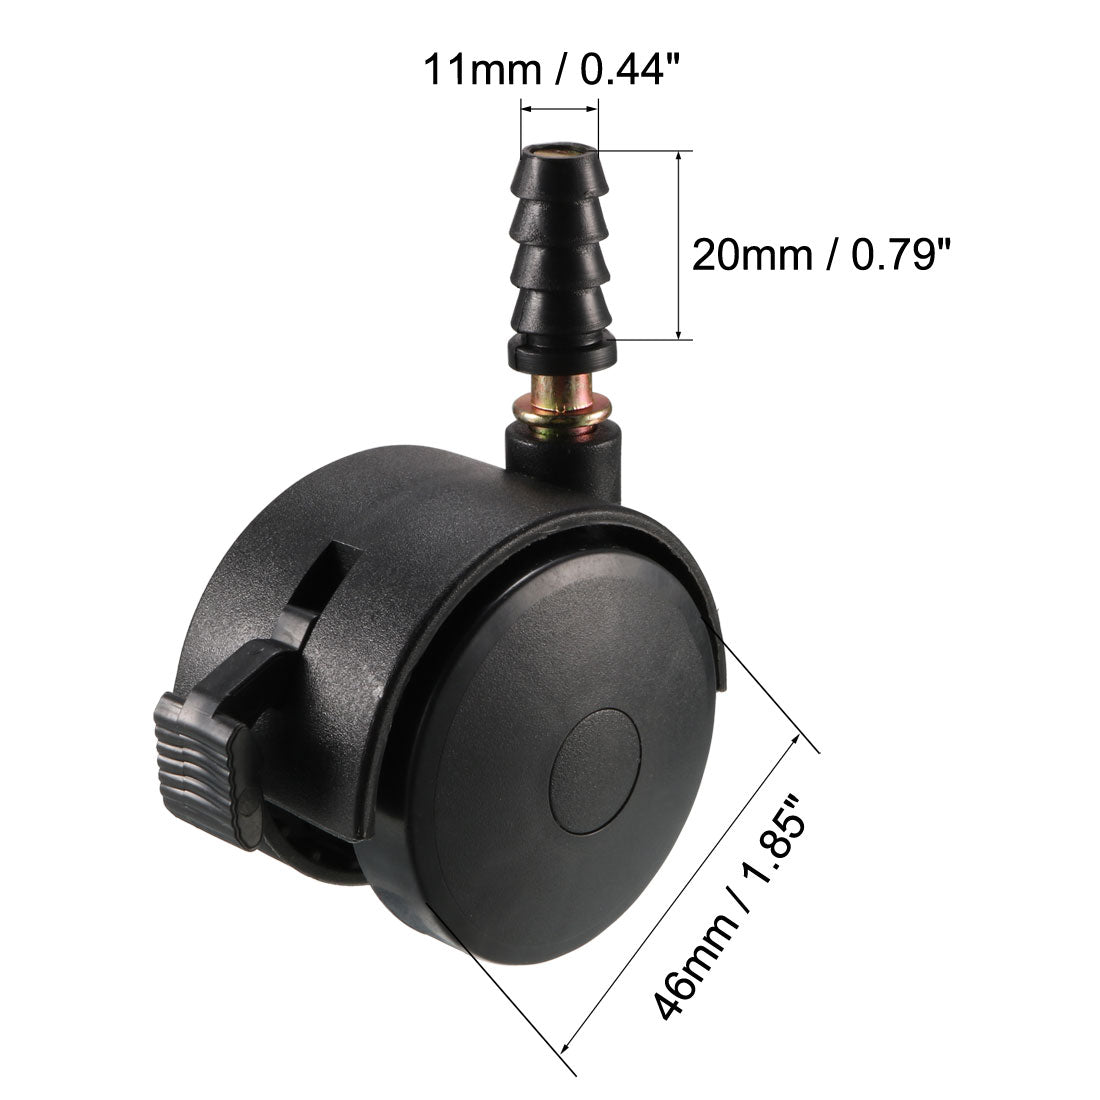 uxcell Uxcell 1.85 Inch Swivel Caster Wheels Grip Neck Stem Caster Black Furniture Wheel with Brake and Mounting Socket